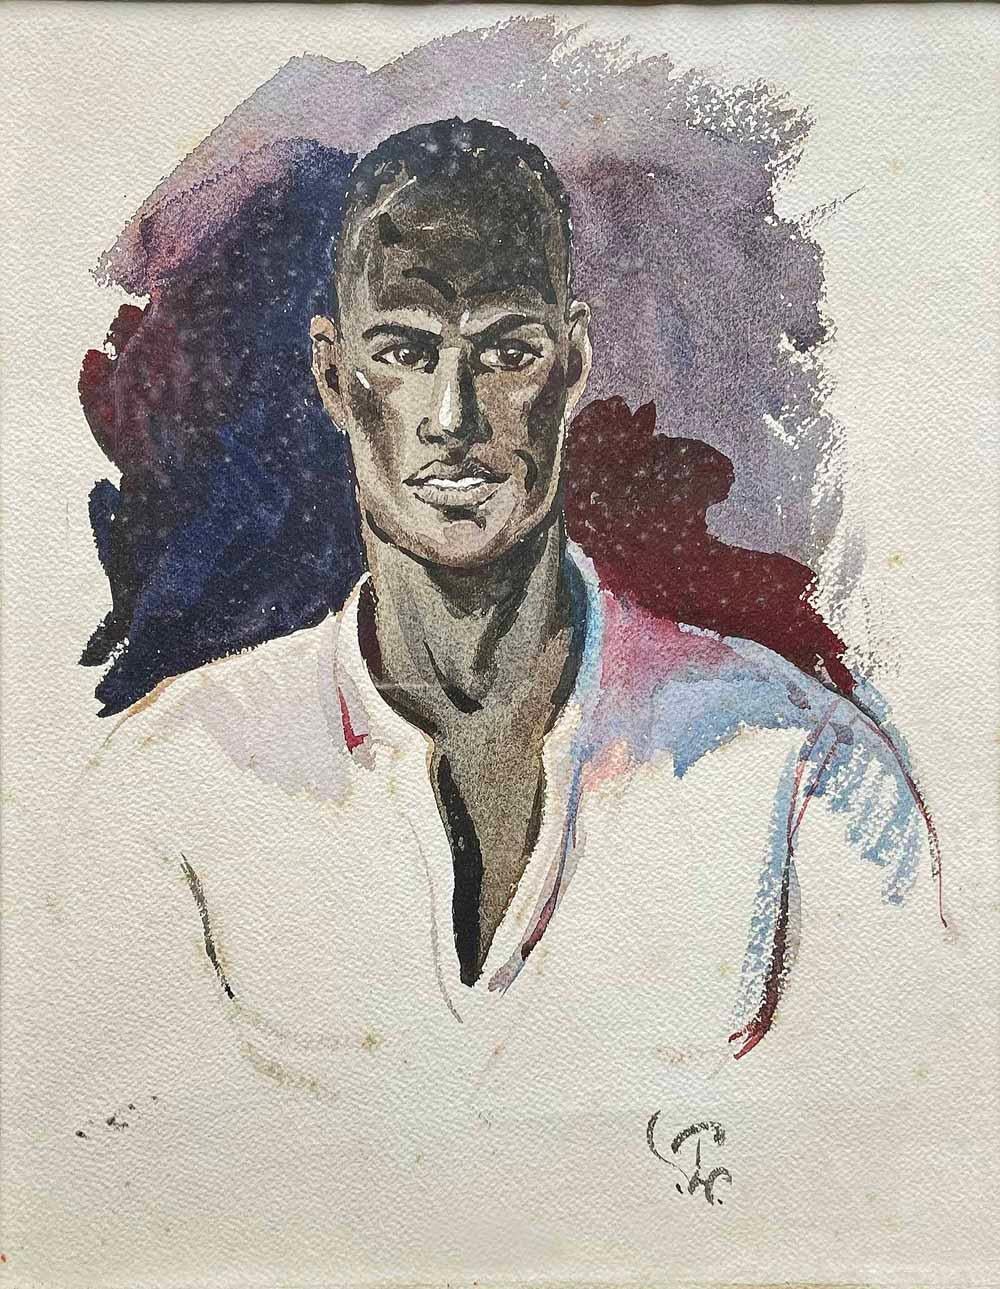 This piercing and powerful portrait of a Tunisian man with an open-necked shirt provides a glimpse into the life of artist Porter Woodruff in North Africa. Woodruff was best known for his paintings and illustrations for Vogue magazine -- one of five